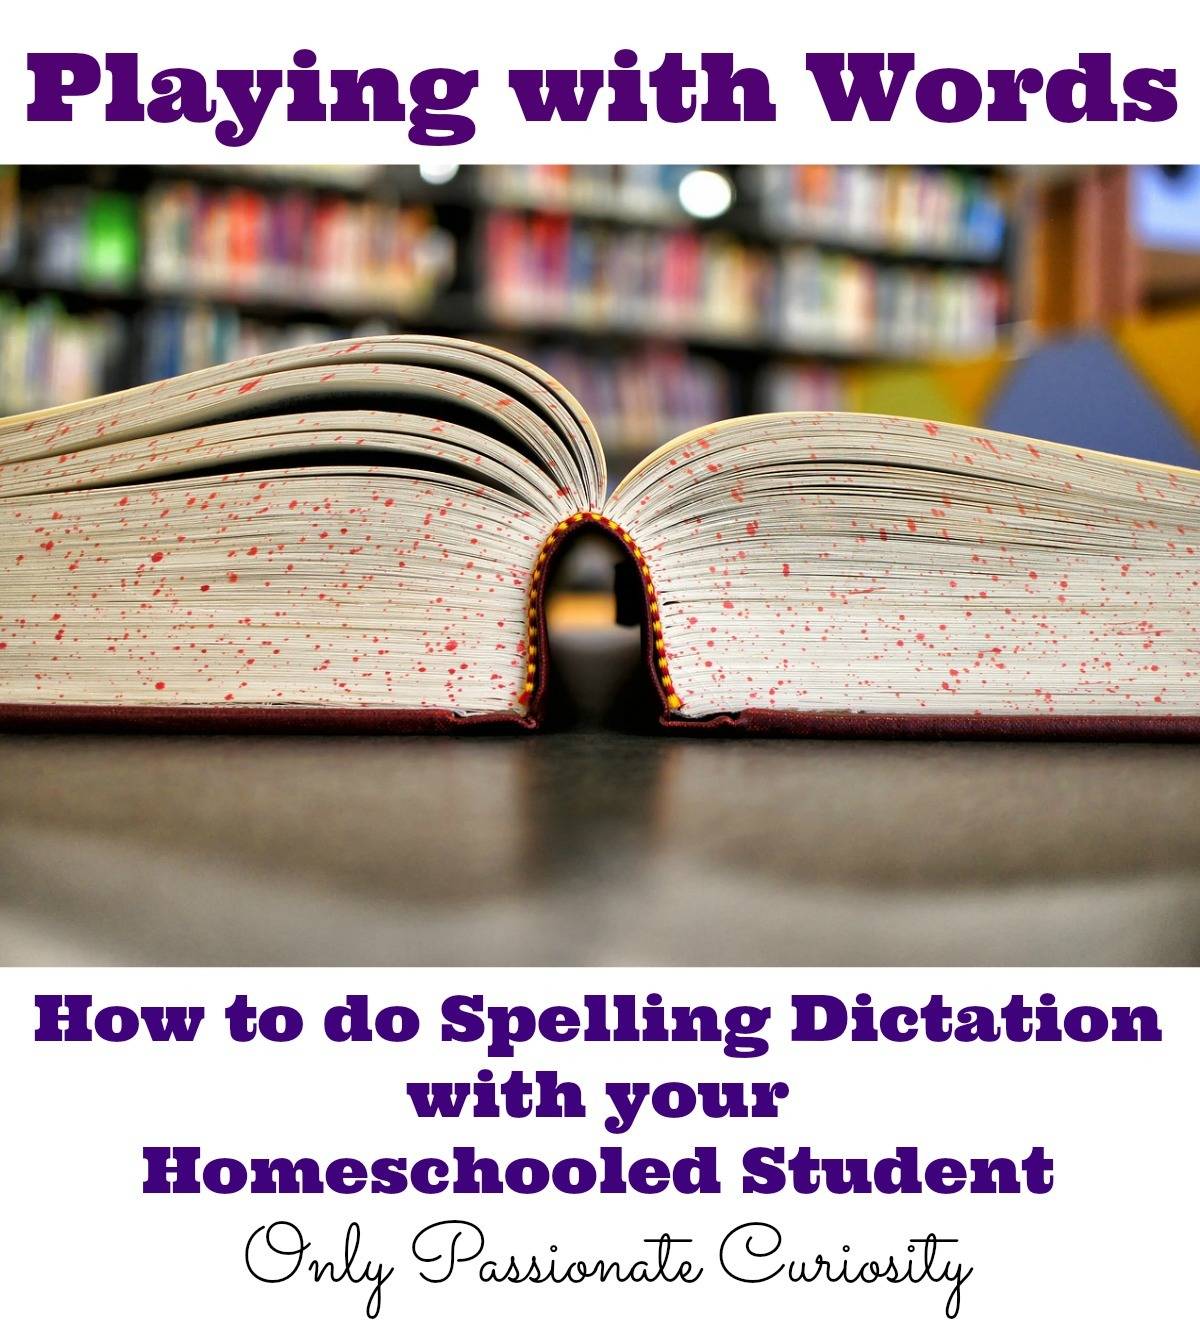 How to do Spelling Dictation with your Homeschooler